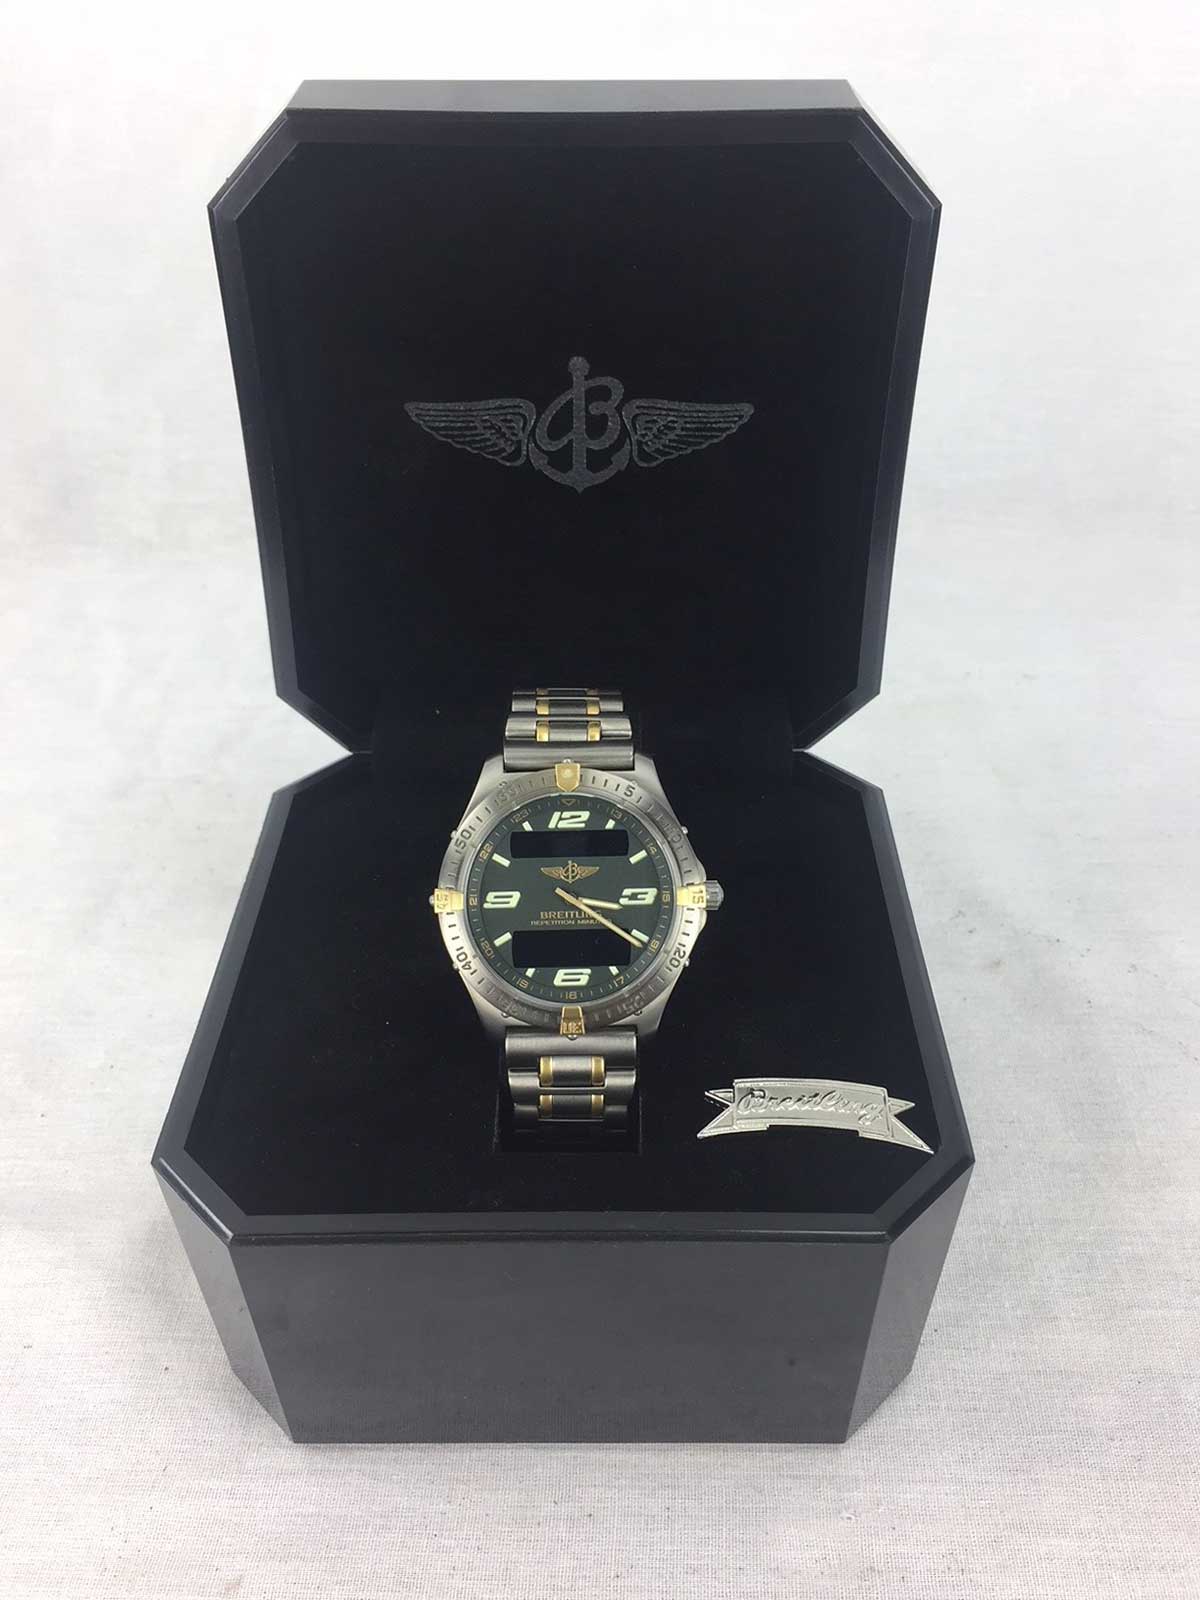 Aerospace Breitling wristwatch with a minute repeater, green-grey dial and bracelet